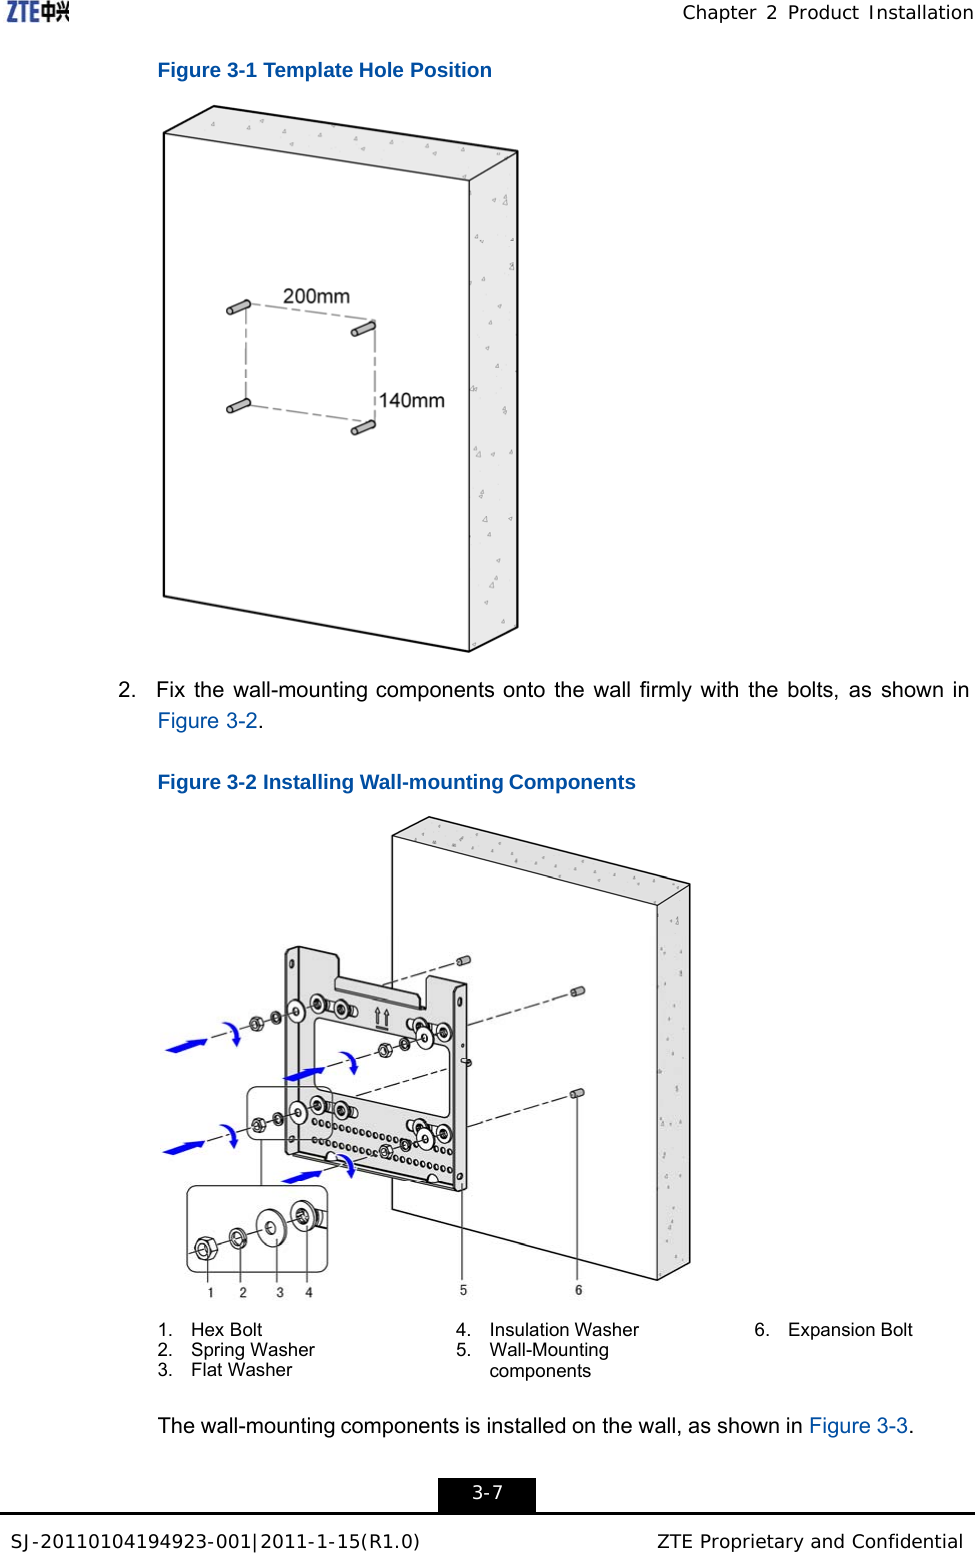 SJ-20110104194923-001|2011-1-15(R1.0) ZTE Proprietary and Confidential Chapter 2 Product Installation    Figure 3-1 Template Hole Position    2.  Fix the wall-mounting components onto the wall firmly with the bolts, as shown in Figure 3-2.   Figure 3-2 Installing Wall-mounting Components    1.    Hex Bolt 2.    Spring Washer 3.    Flat Washer 4.    Insulation Washer 5.    Wall-Mounting components 6.    Expansion Bolt  The wall-mounting components is installed on the wall, as shown in Figure 3-3.   3-7 